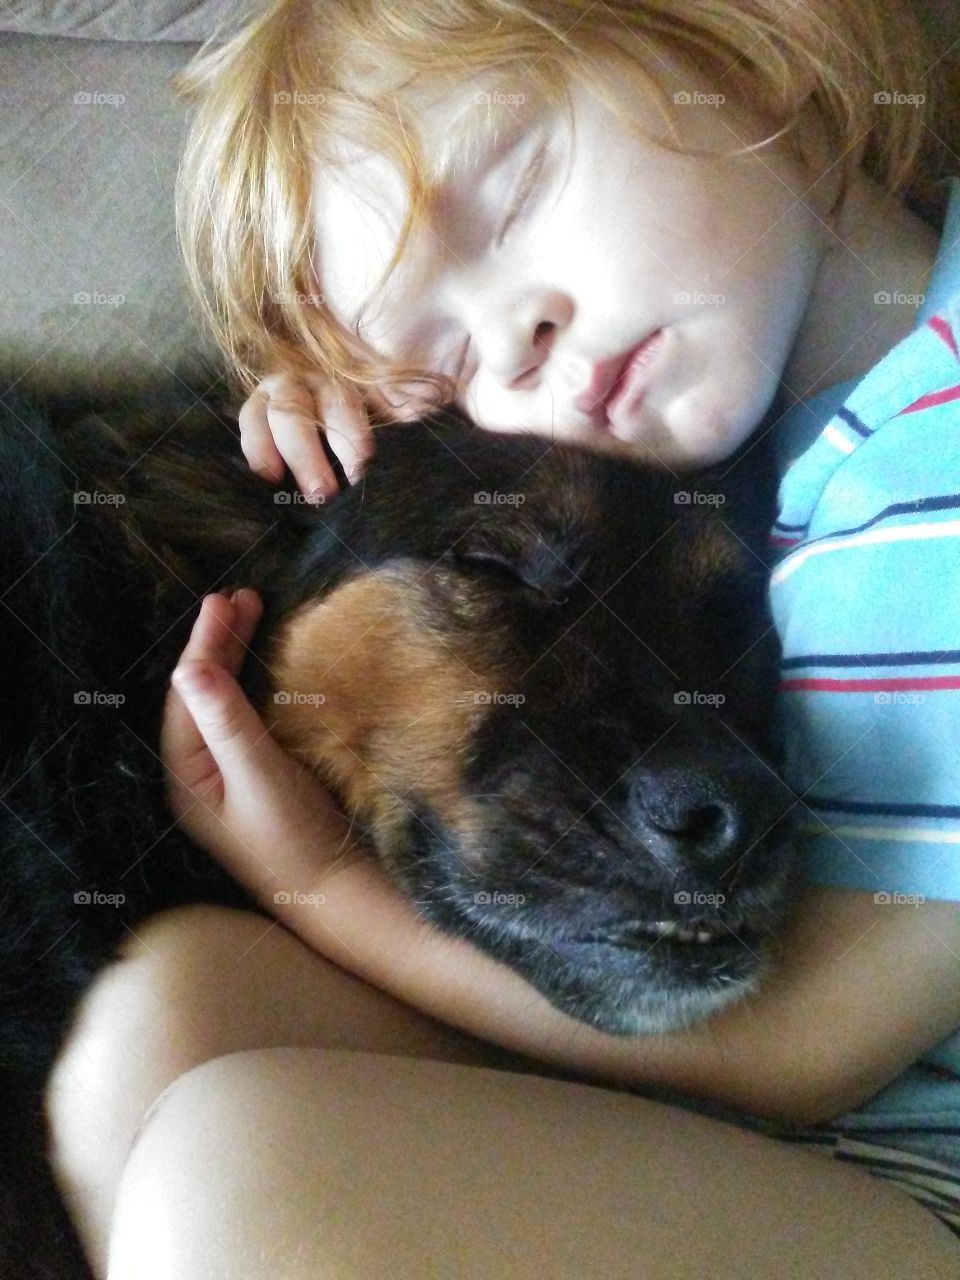 The bond between a boy and his dog is unlike any other